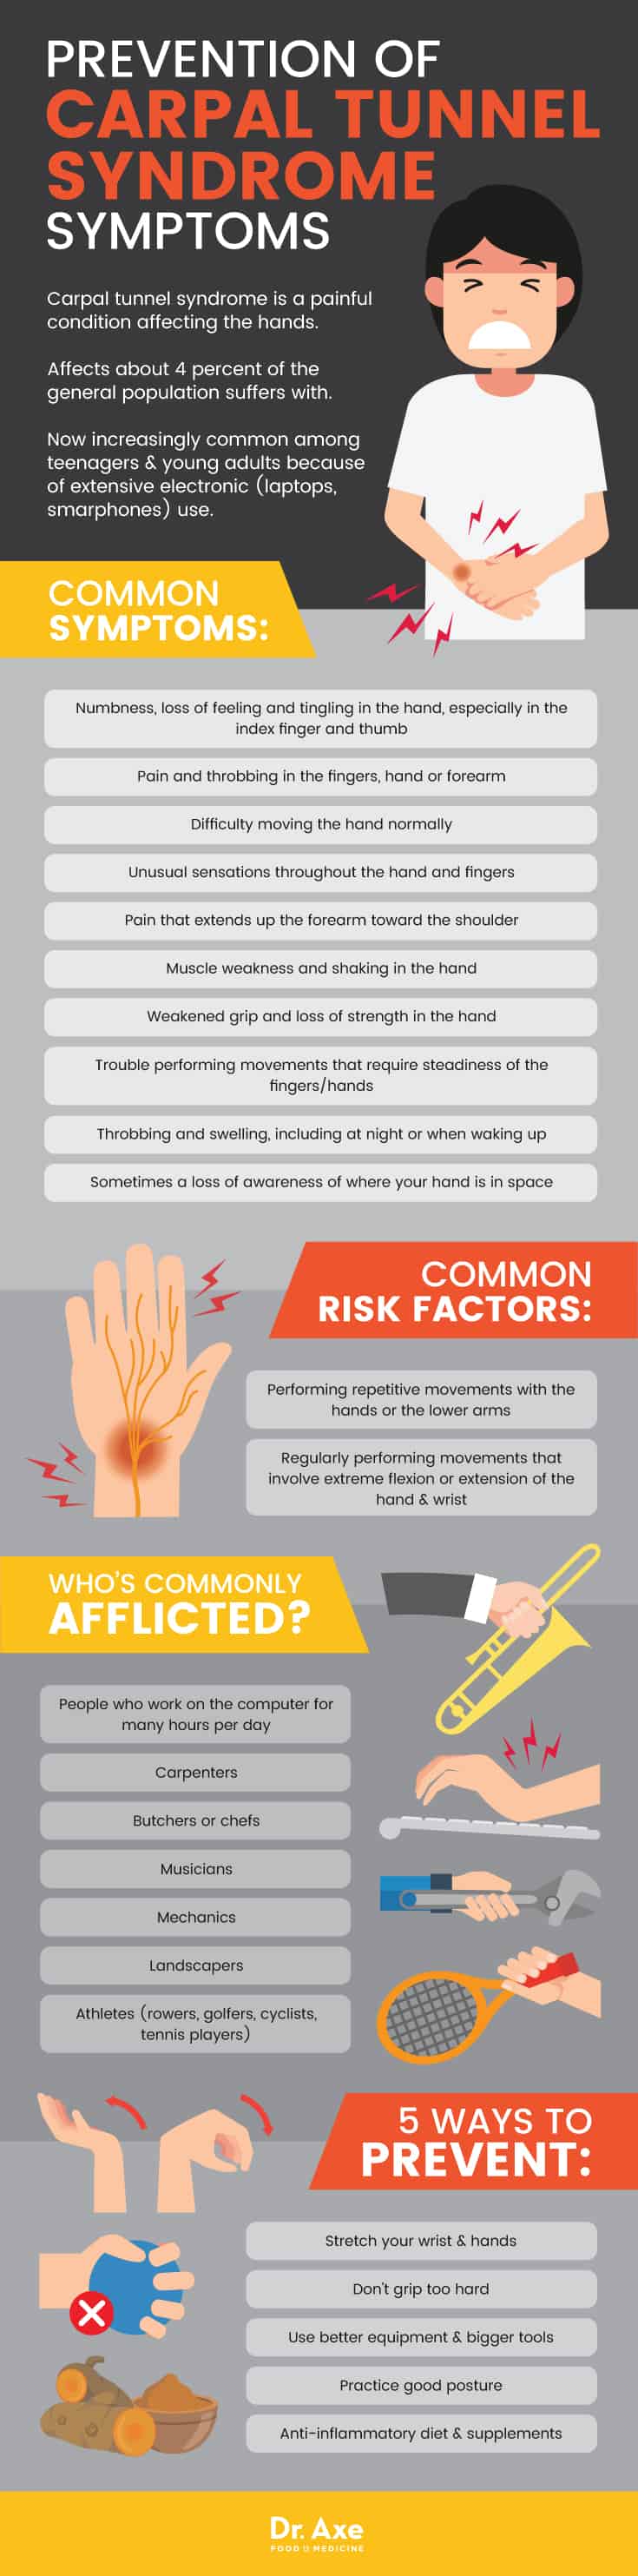 Carpal tunnel syndrome symptoms - Dr. Axe